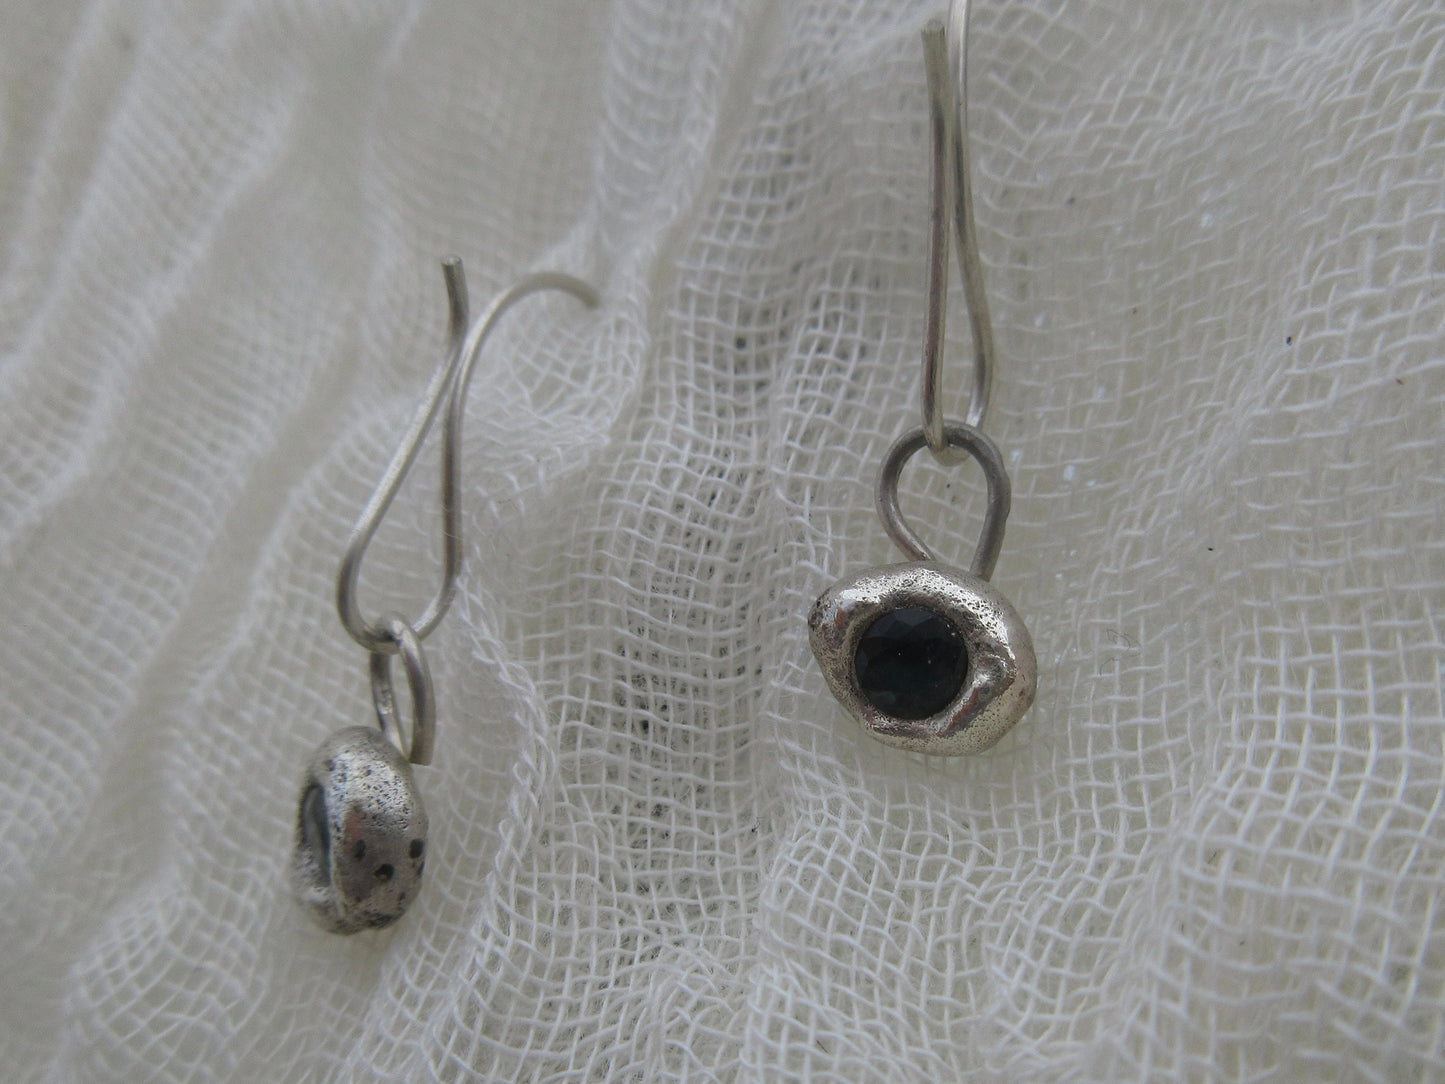 Cast in place sapphire earrings in argentium sterling silver